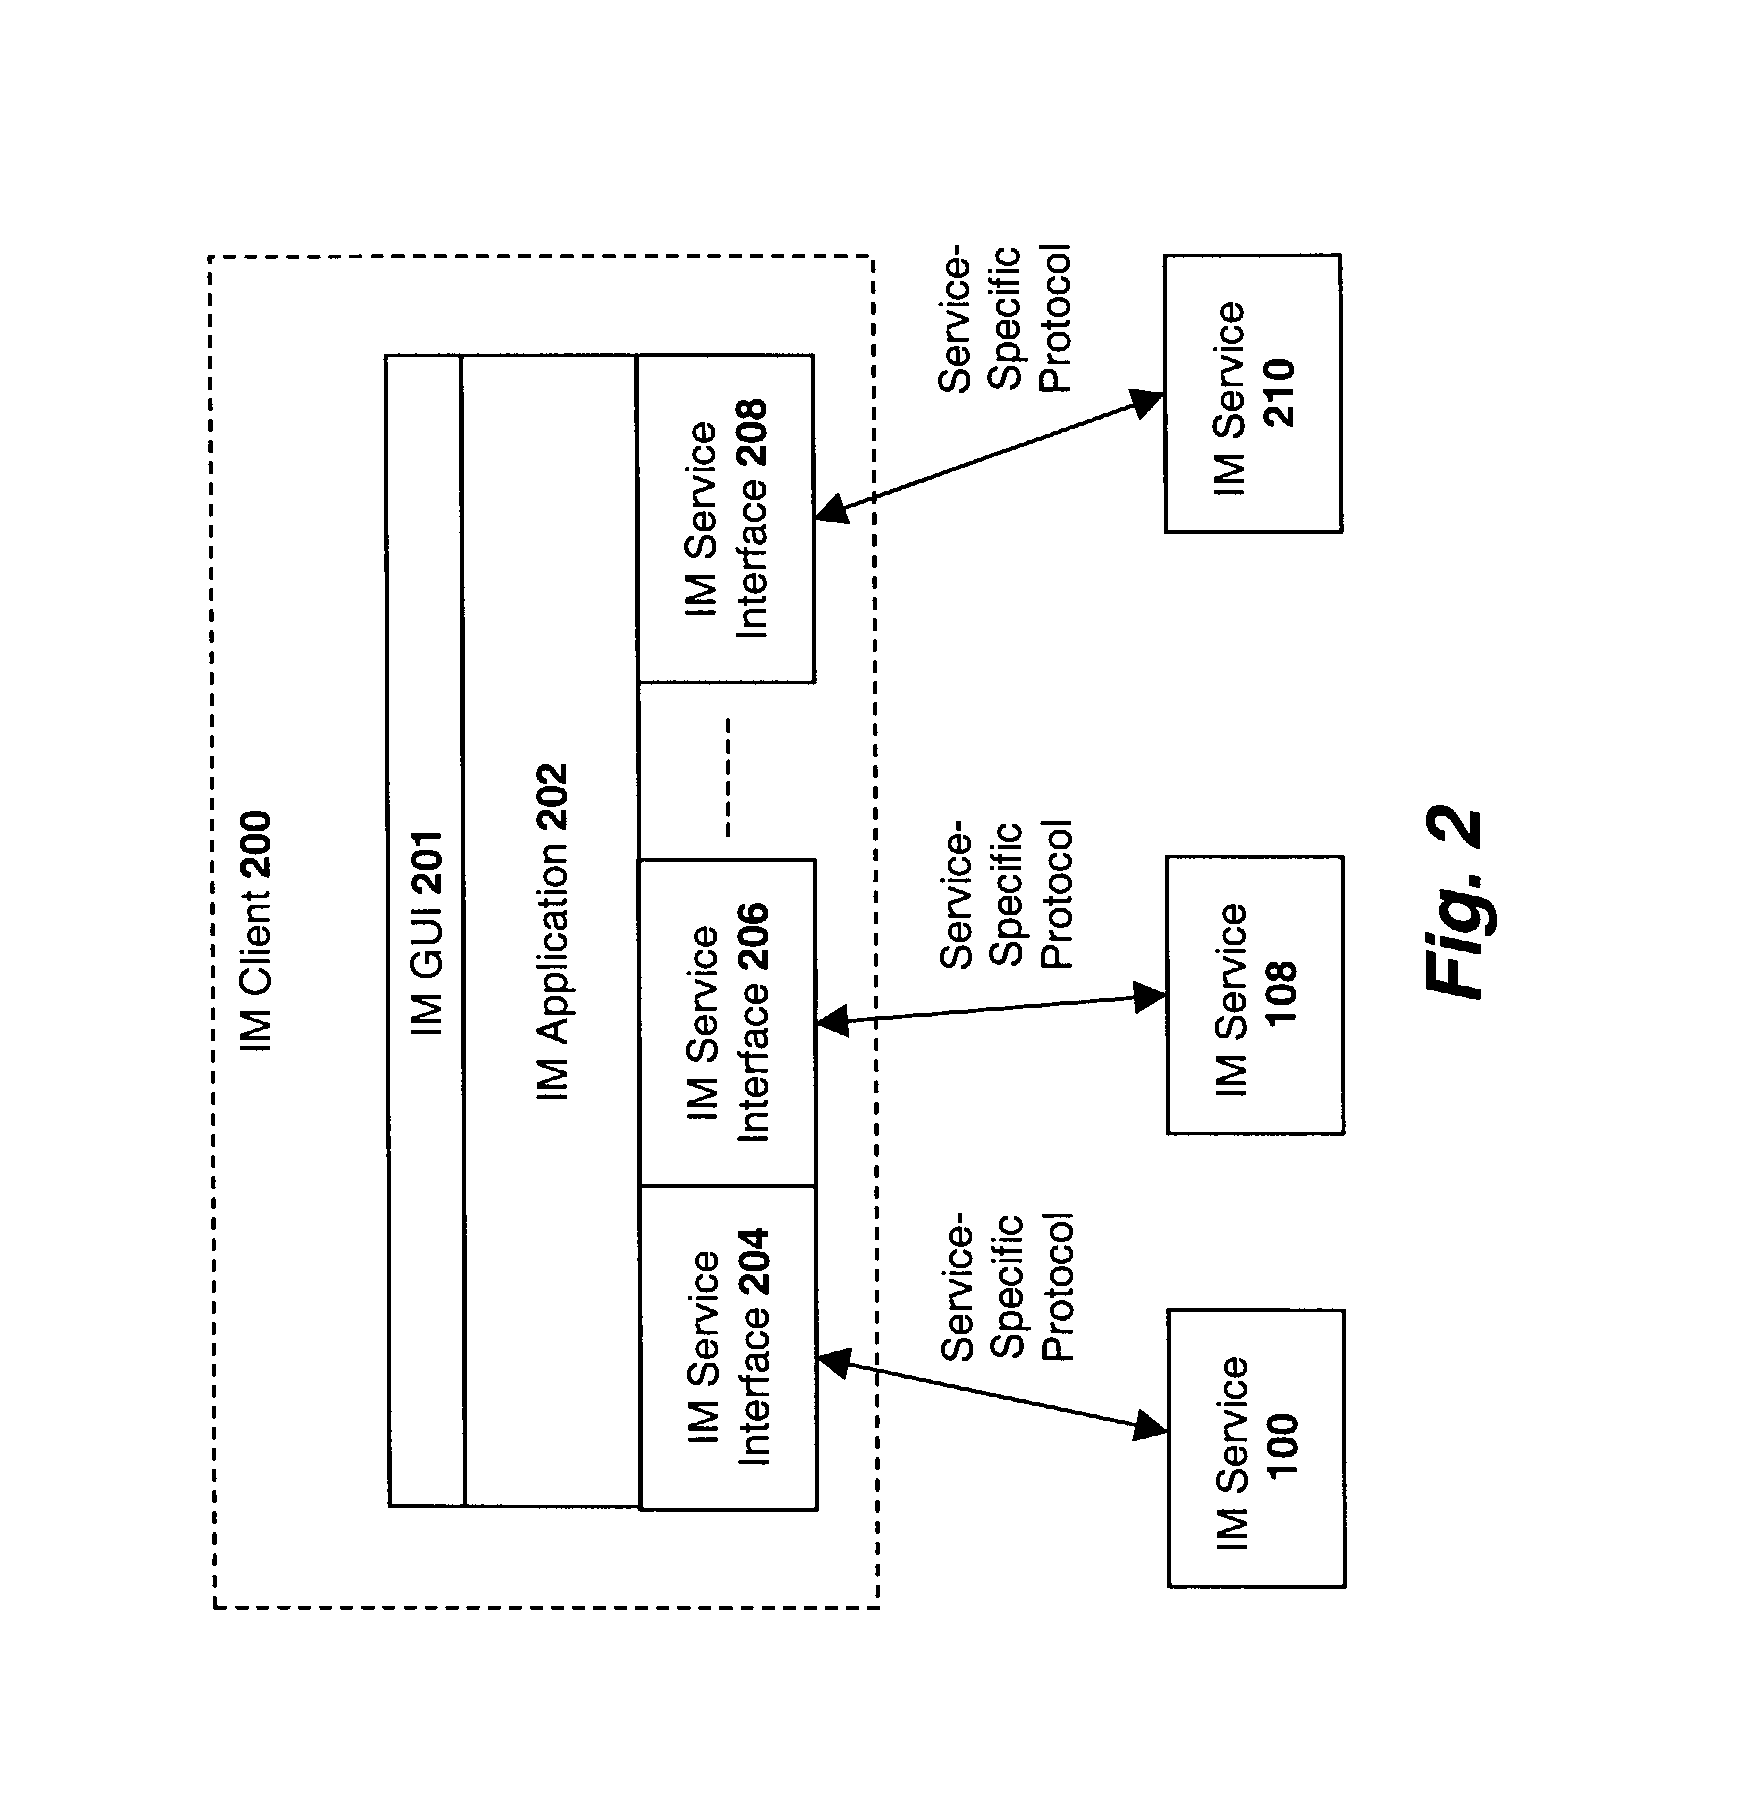 System and method for managing contacts in an instant messaging environment